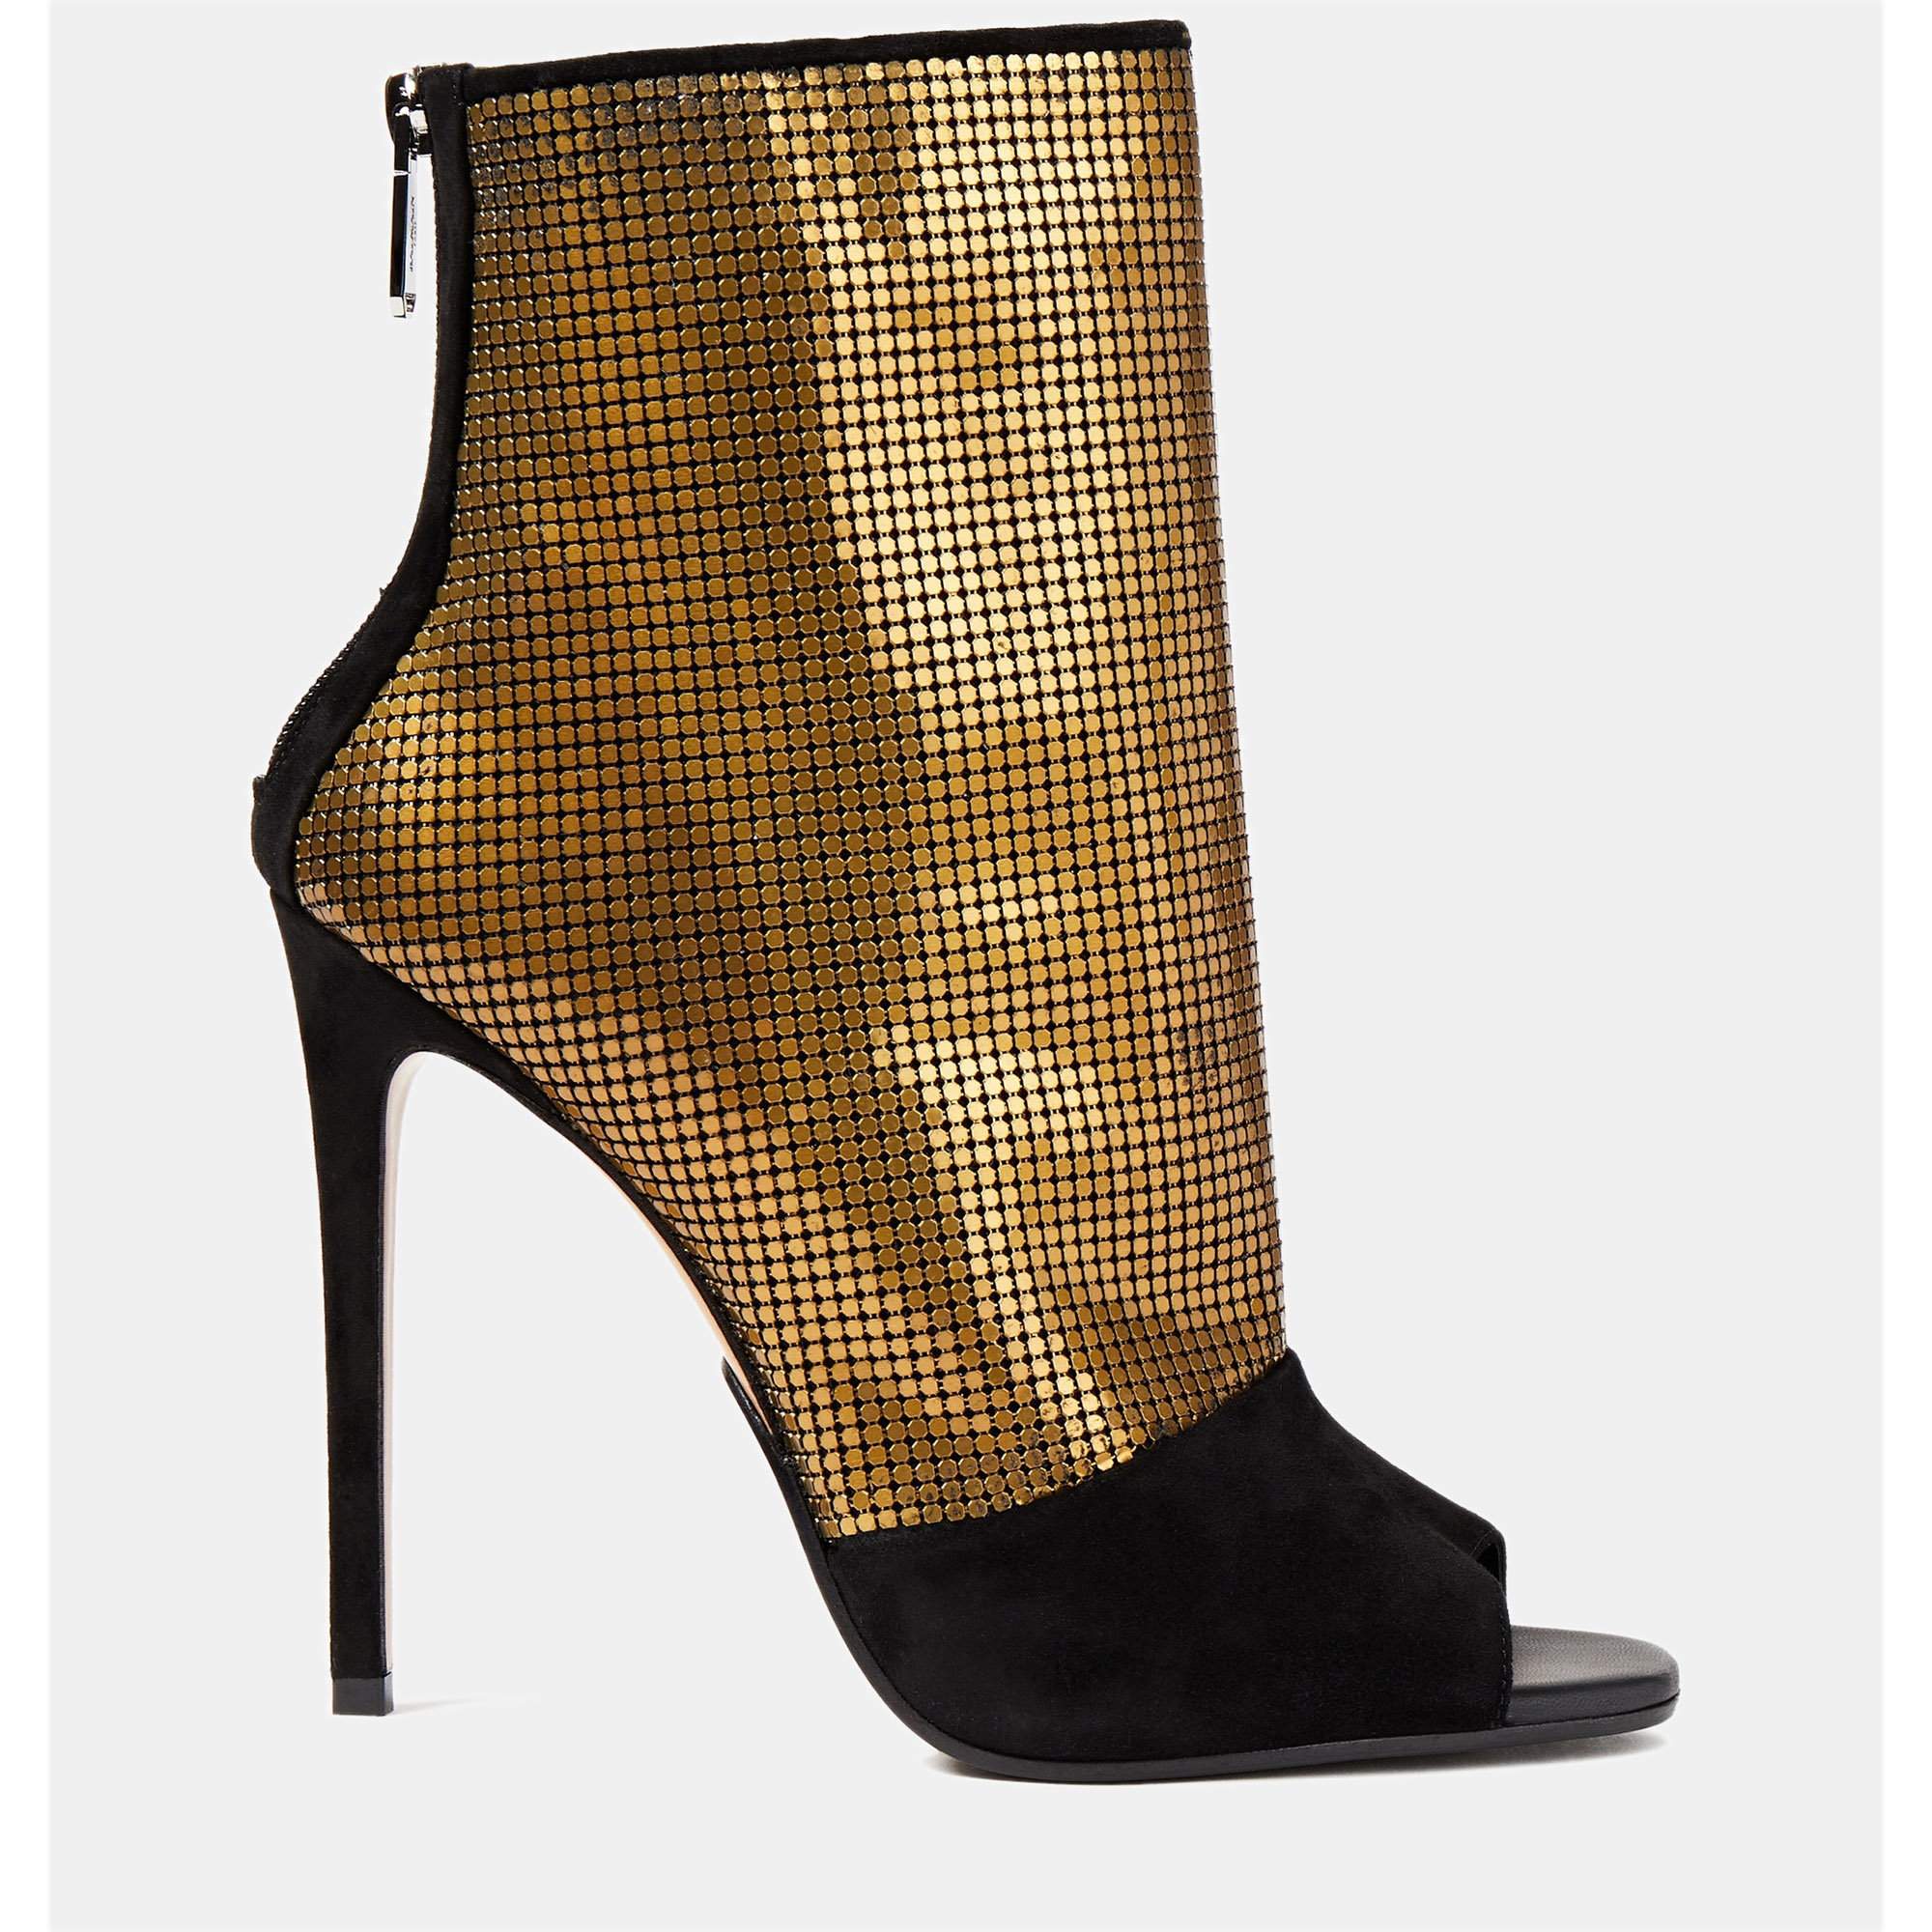 Balmain suede chainmail peep toe ankle boots 40